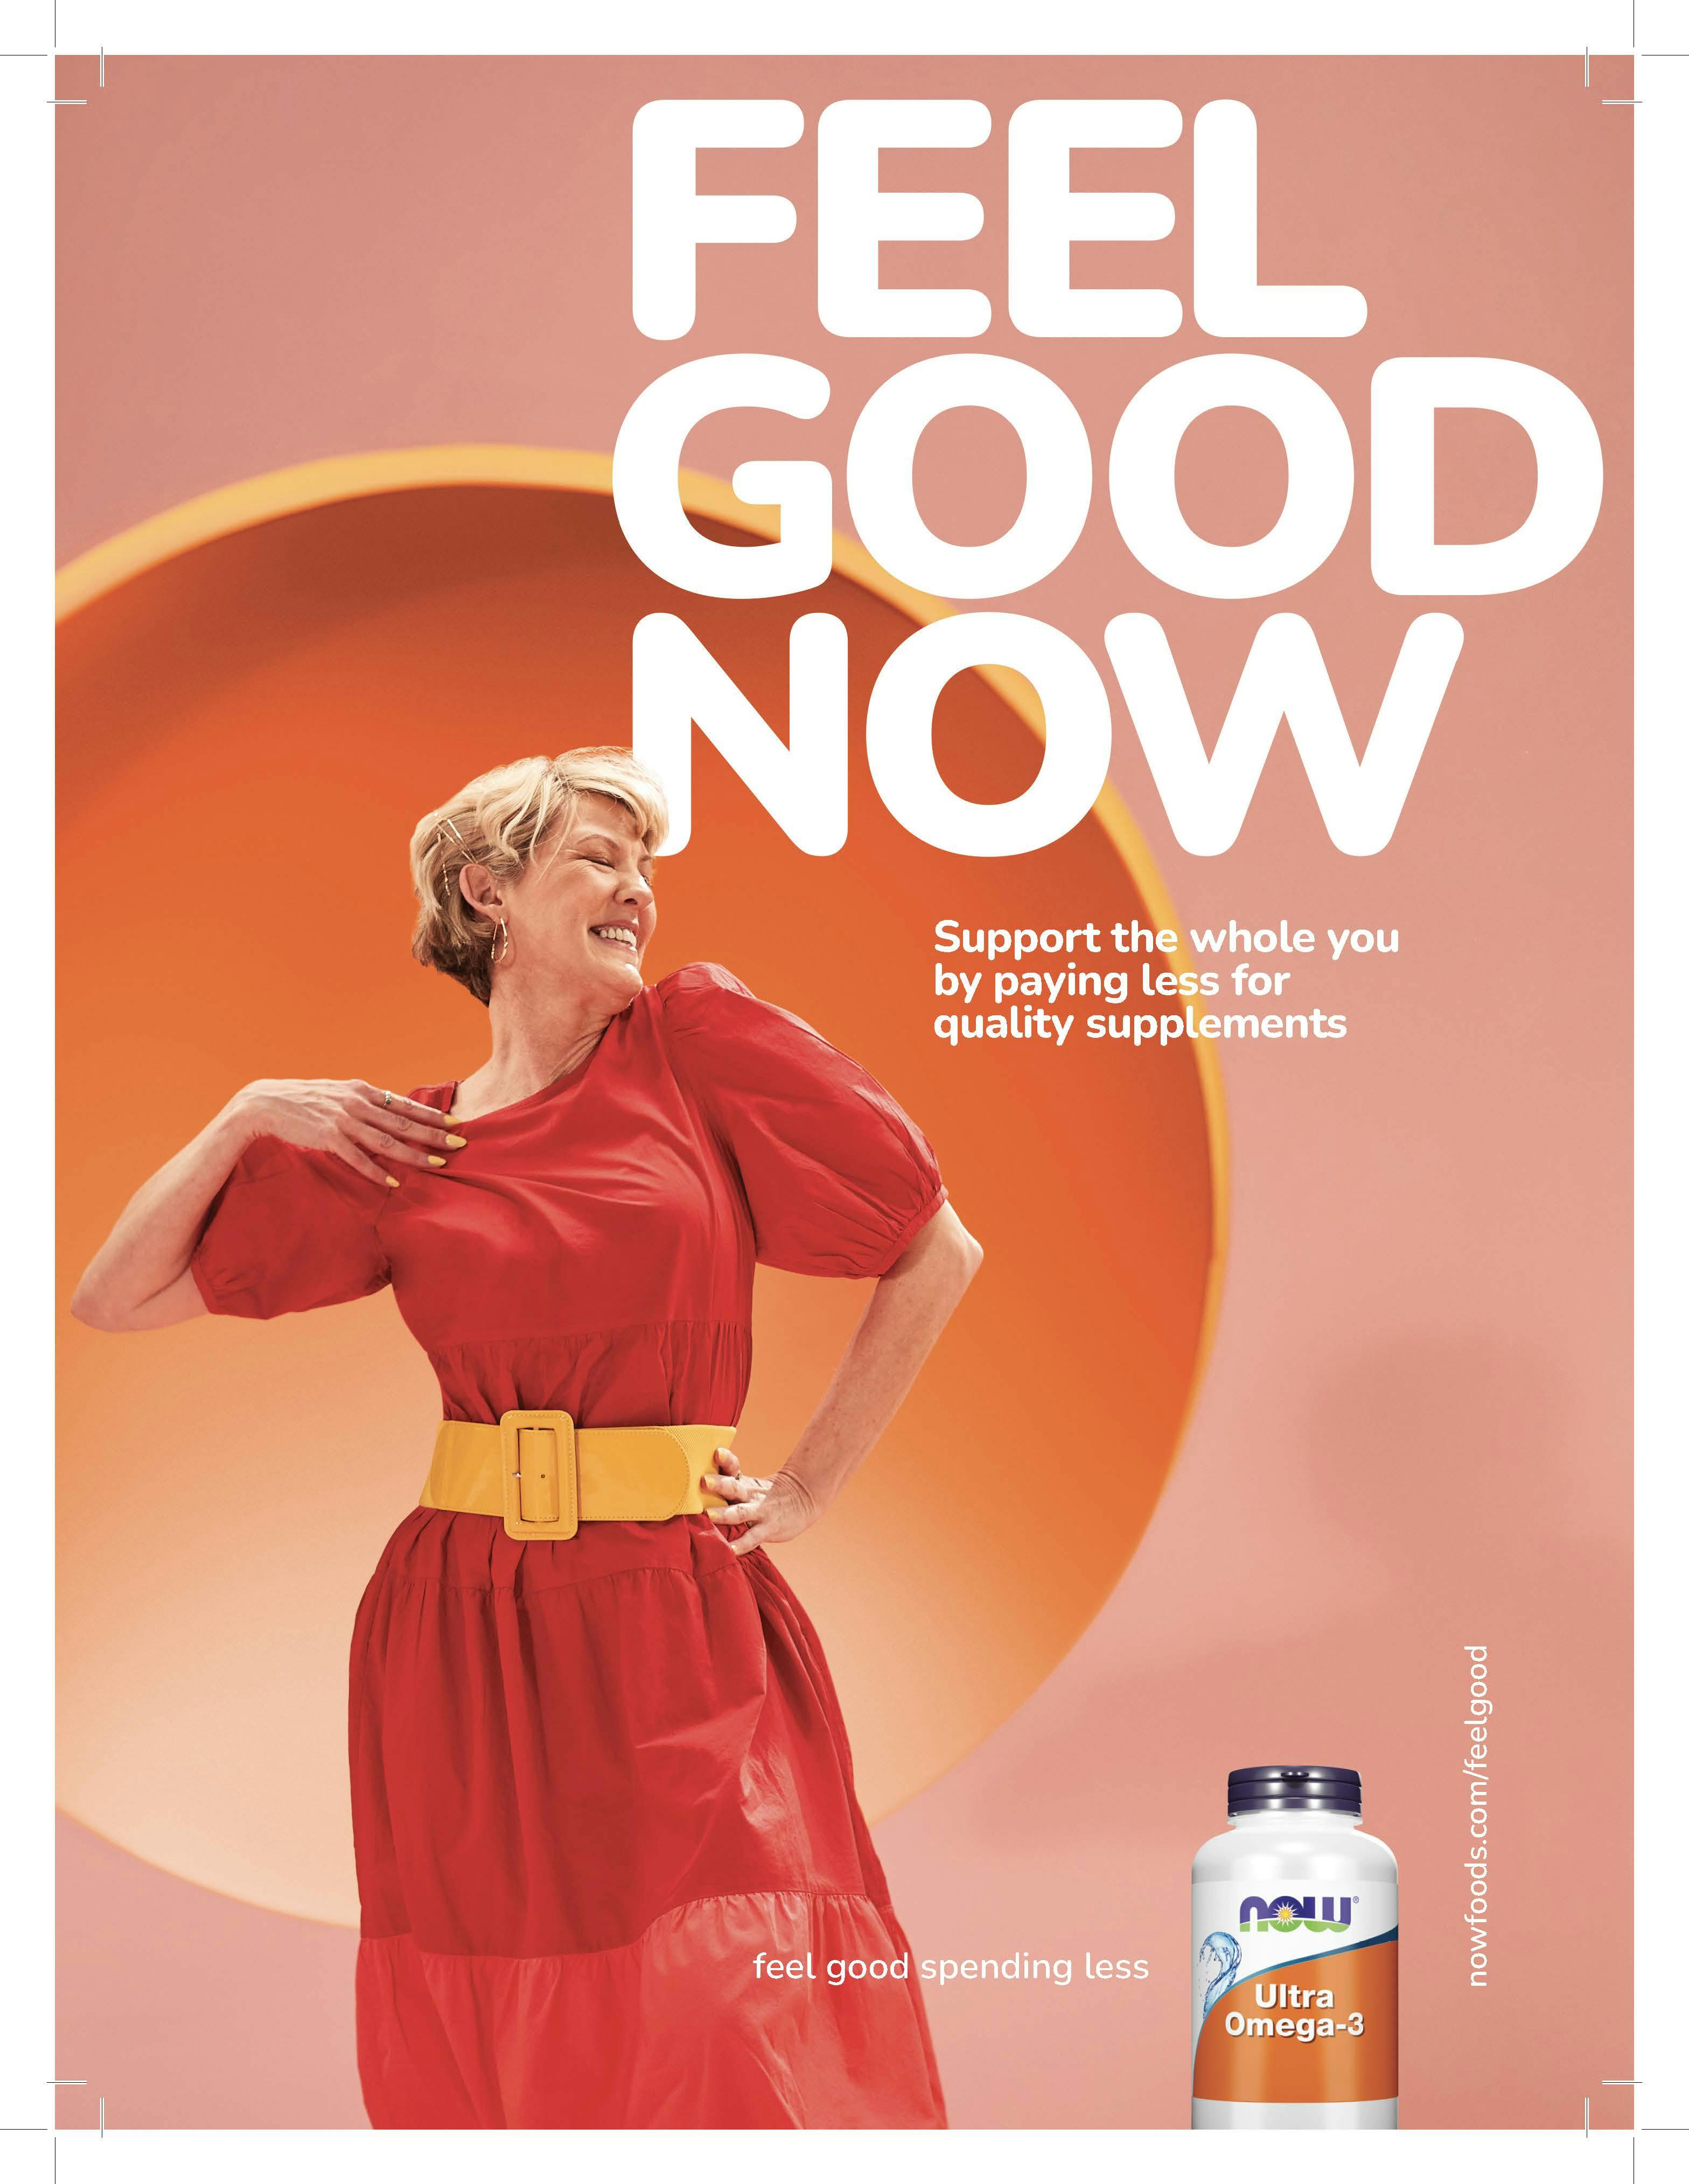 Example of Now's ad campaign.